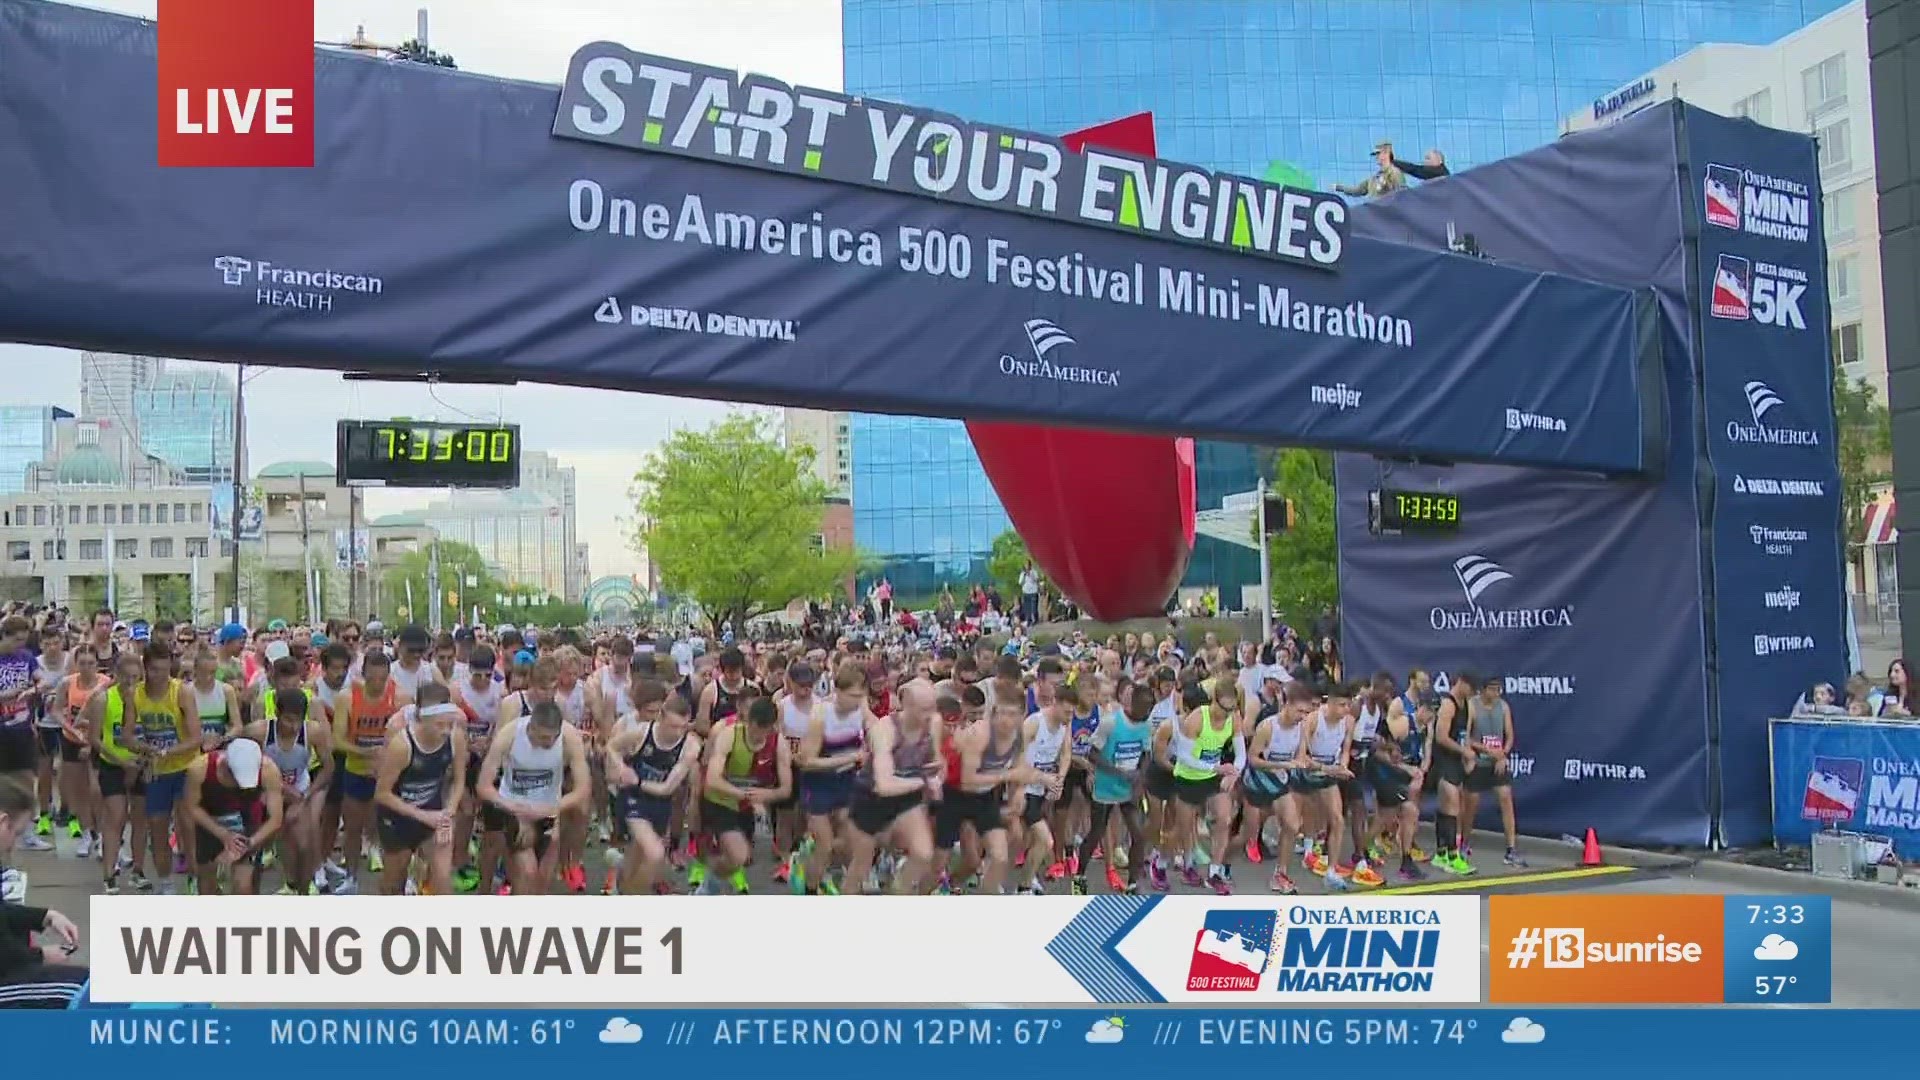 The elite runners started in Wave 1 of the 500 Festival Mini Marathon.